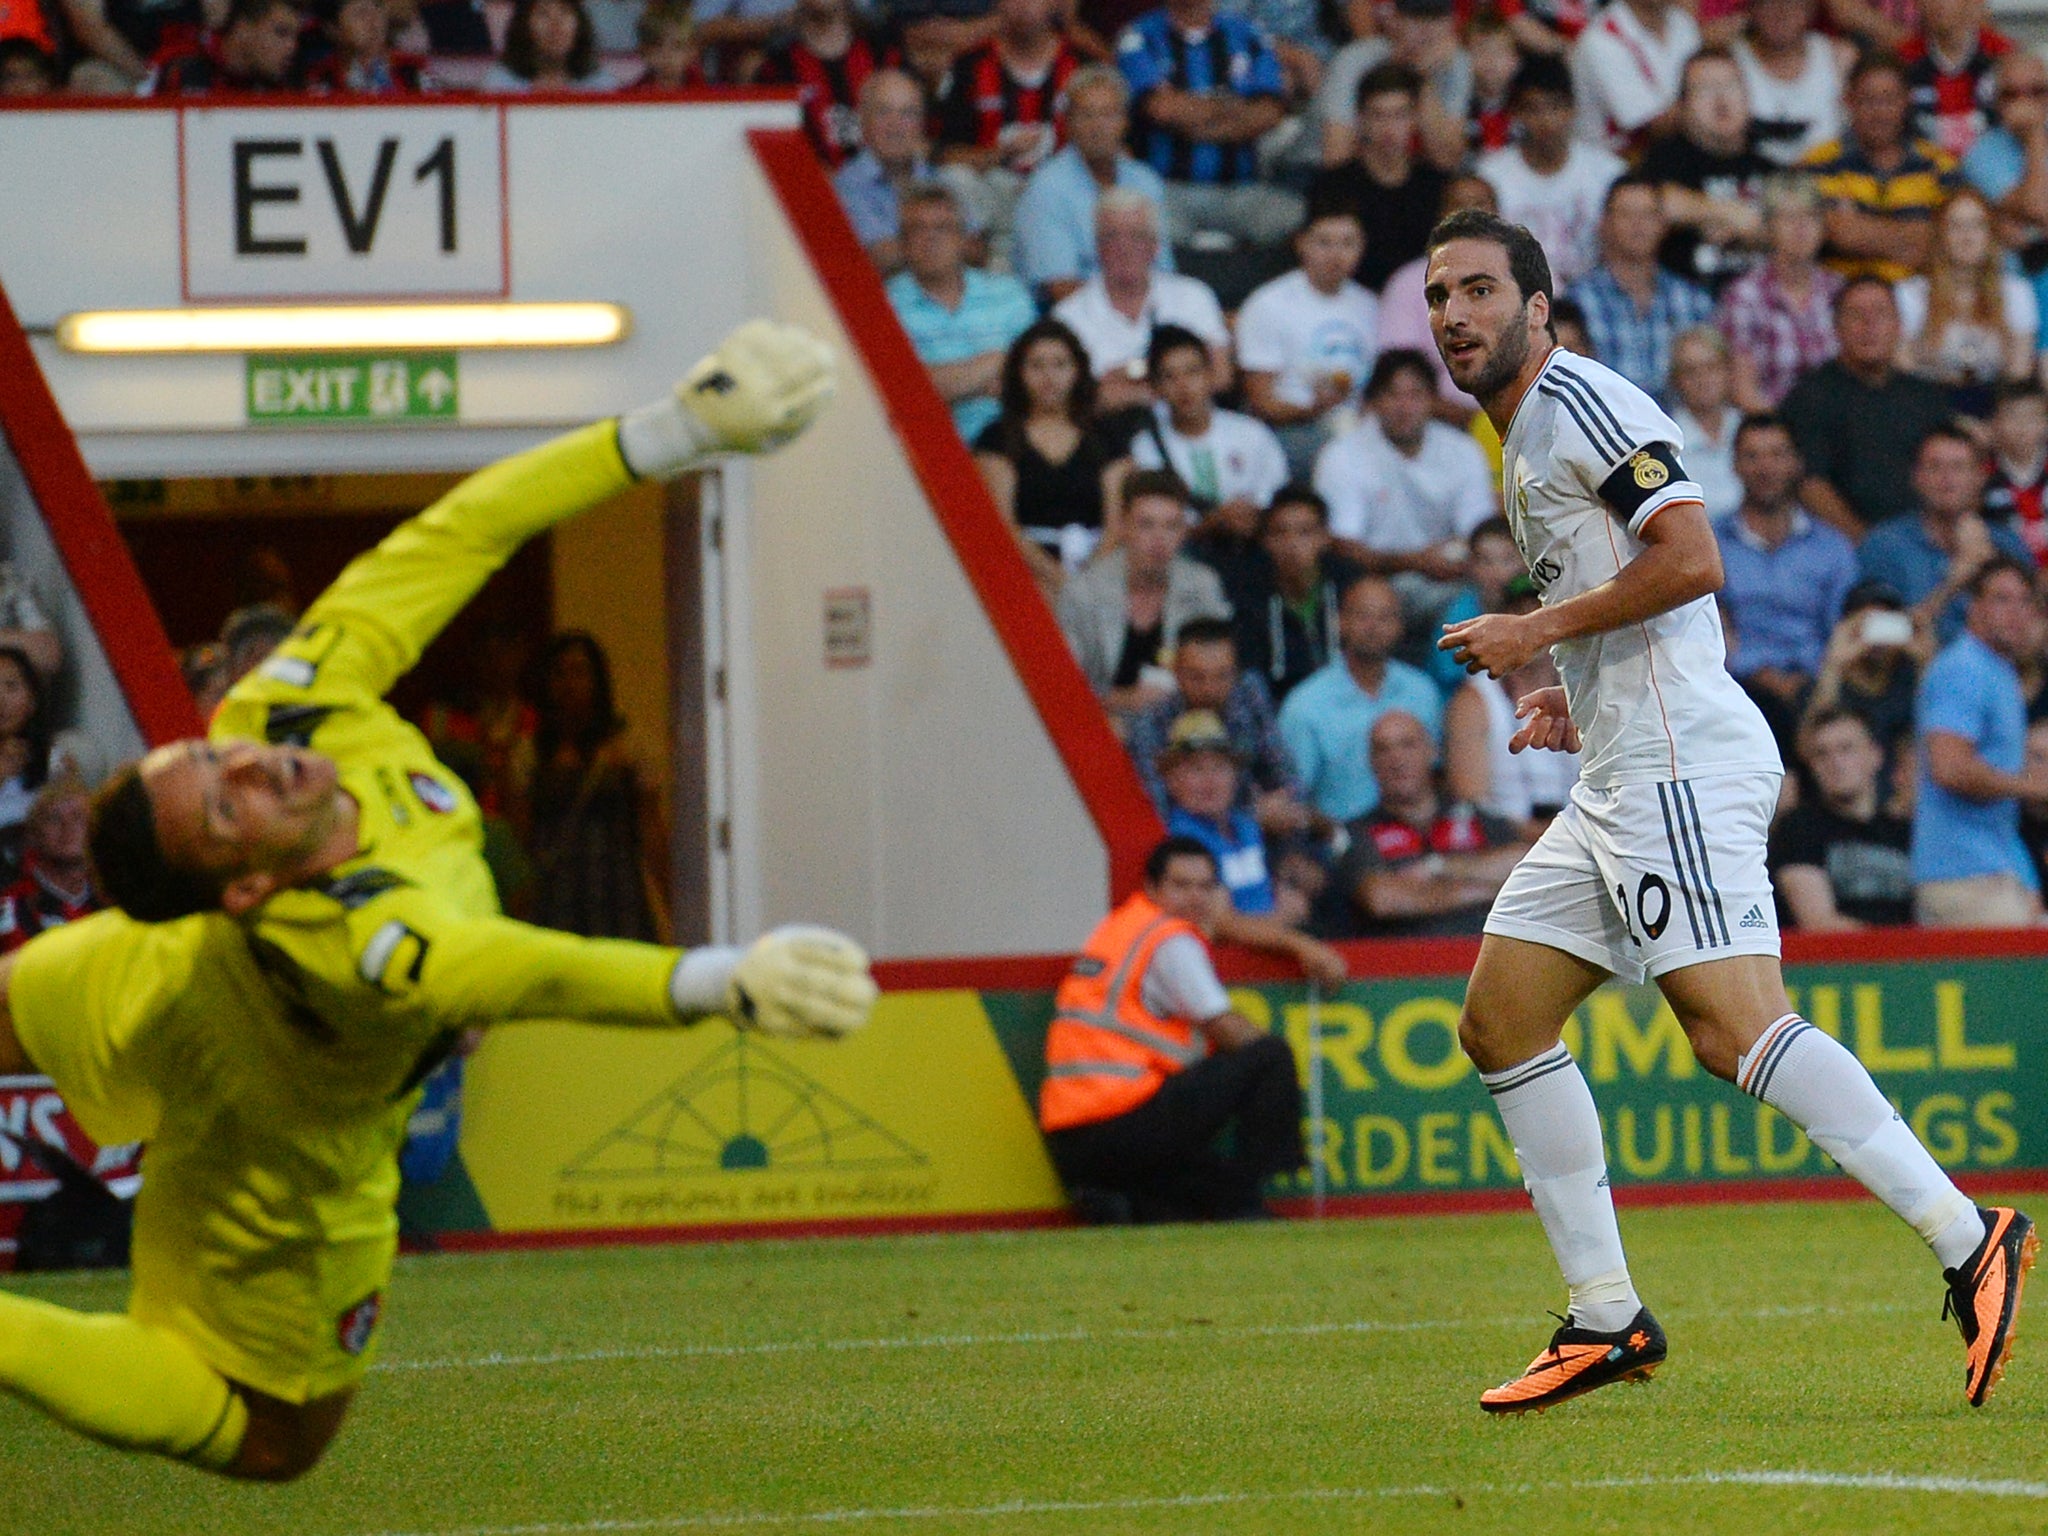 Gonzalo Higuain scores in Real Madrid's pre-season friendly against Bournemouth at Dean Road